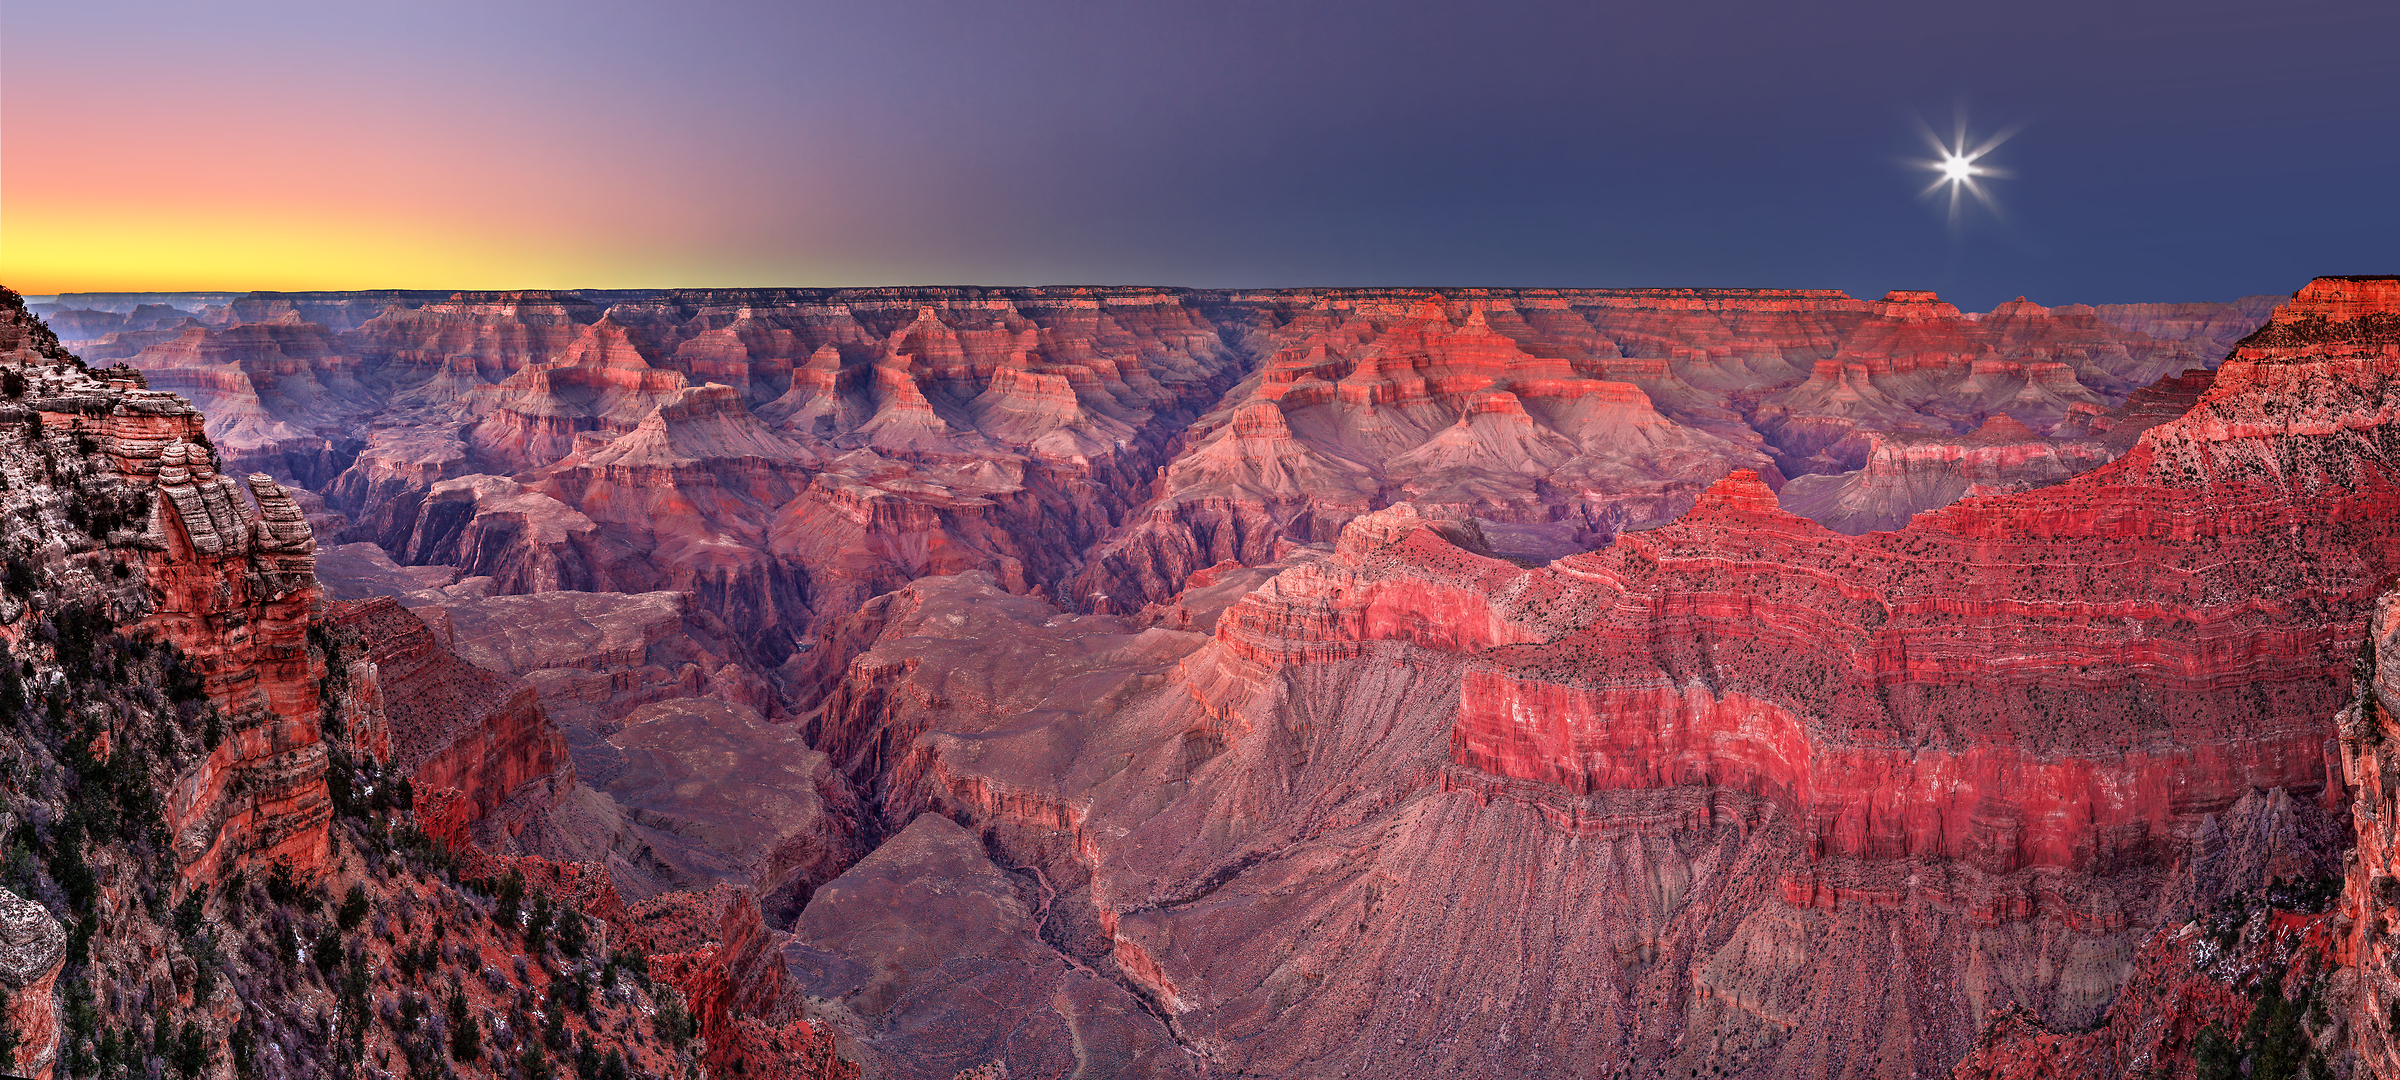 472 megapixels! A very high resolution, large-format VAST photo print of the Grand Canyon at sunset from Mather Point; fine art landscape photo created by Chris Collacott in Grand Canyon National Park, Arizona.